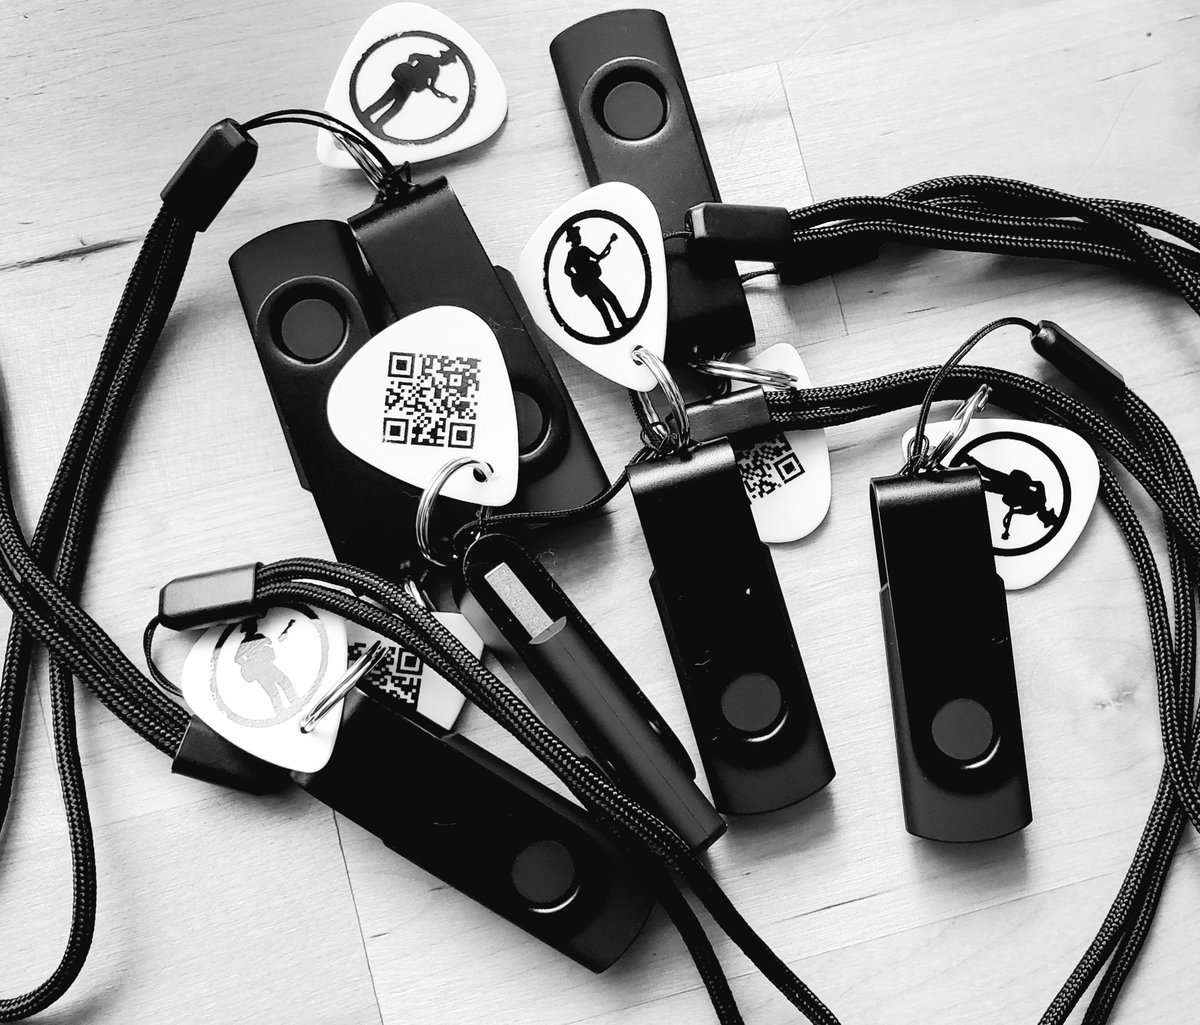 A new round of Flash Drives - Included - Cautionary Tales record, lyrics, art, dedication page and photos. 
*the new guitar pick design AC - Beatrice Coron. QR code links you to the website.
Swing on by. !![:{)>
#deanjohanesen #cautionarytales #newrecord #flashdrive #swingonby